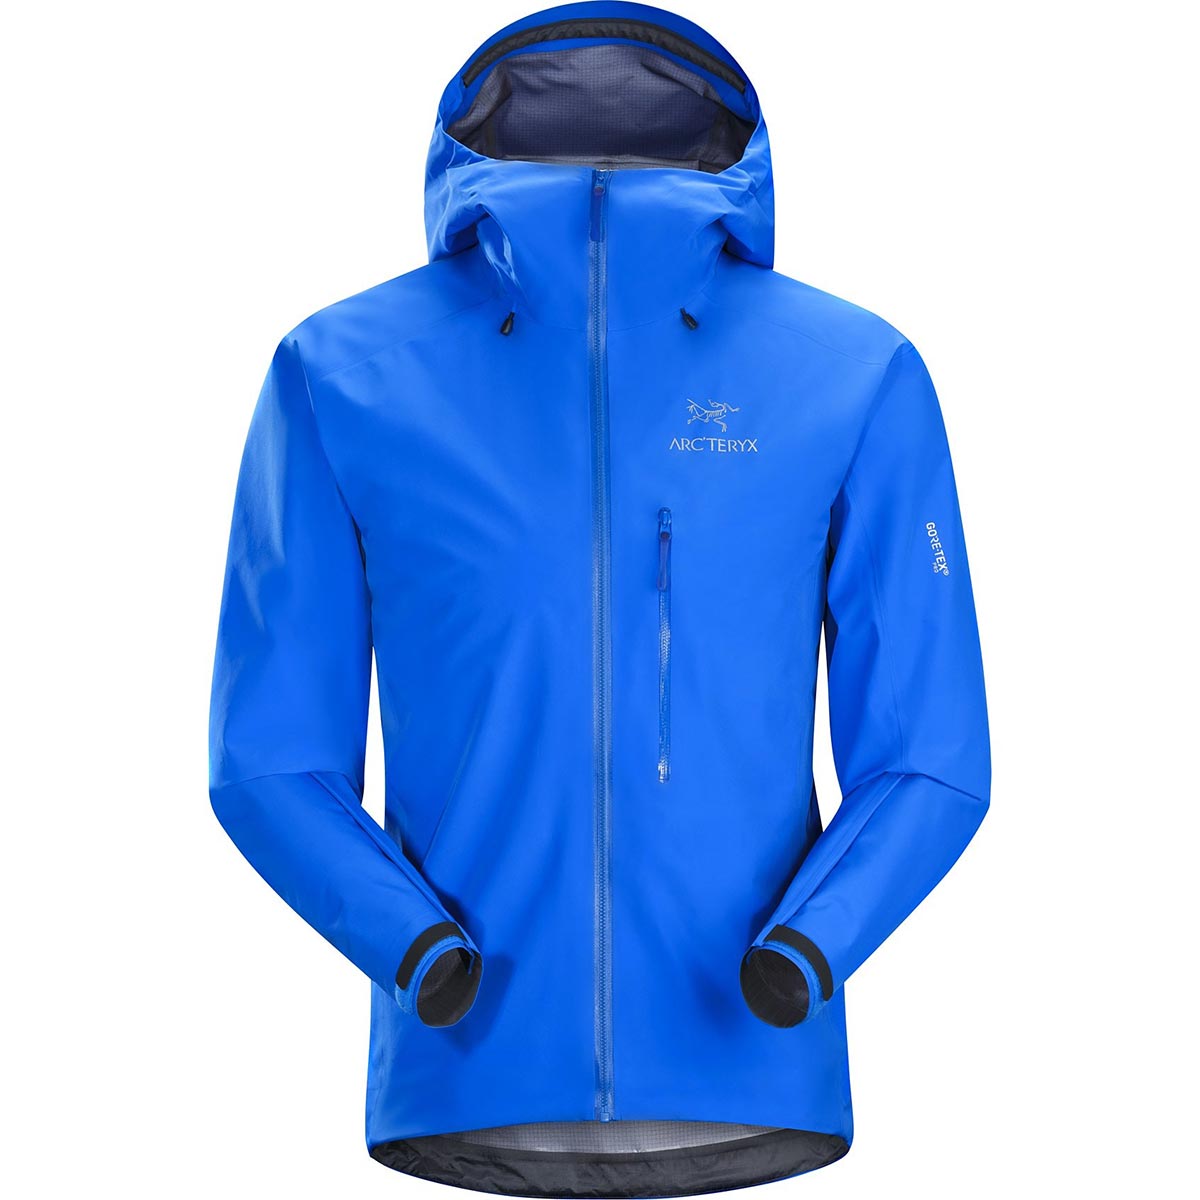 Arc Teryx Alpha Fl Jacket Men S Discontinued Fall 18 Colors Free Ground Shipping Waterproof Shell Jackets Men S Jackets Clothing Moontrail